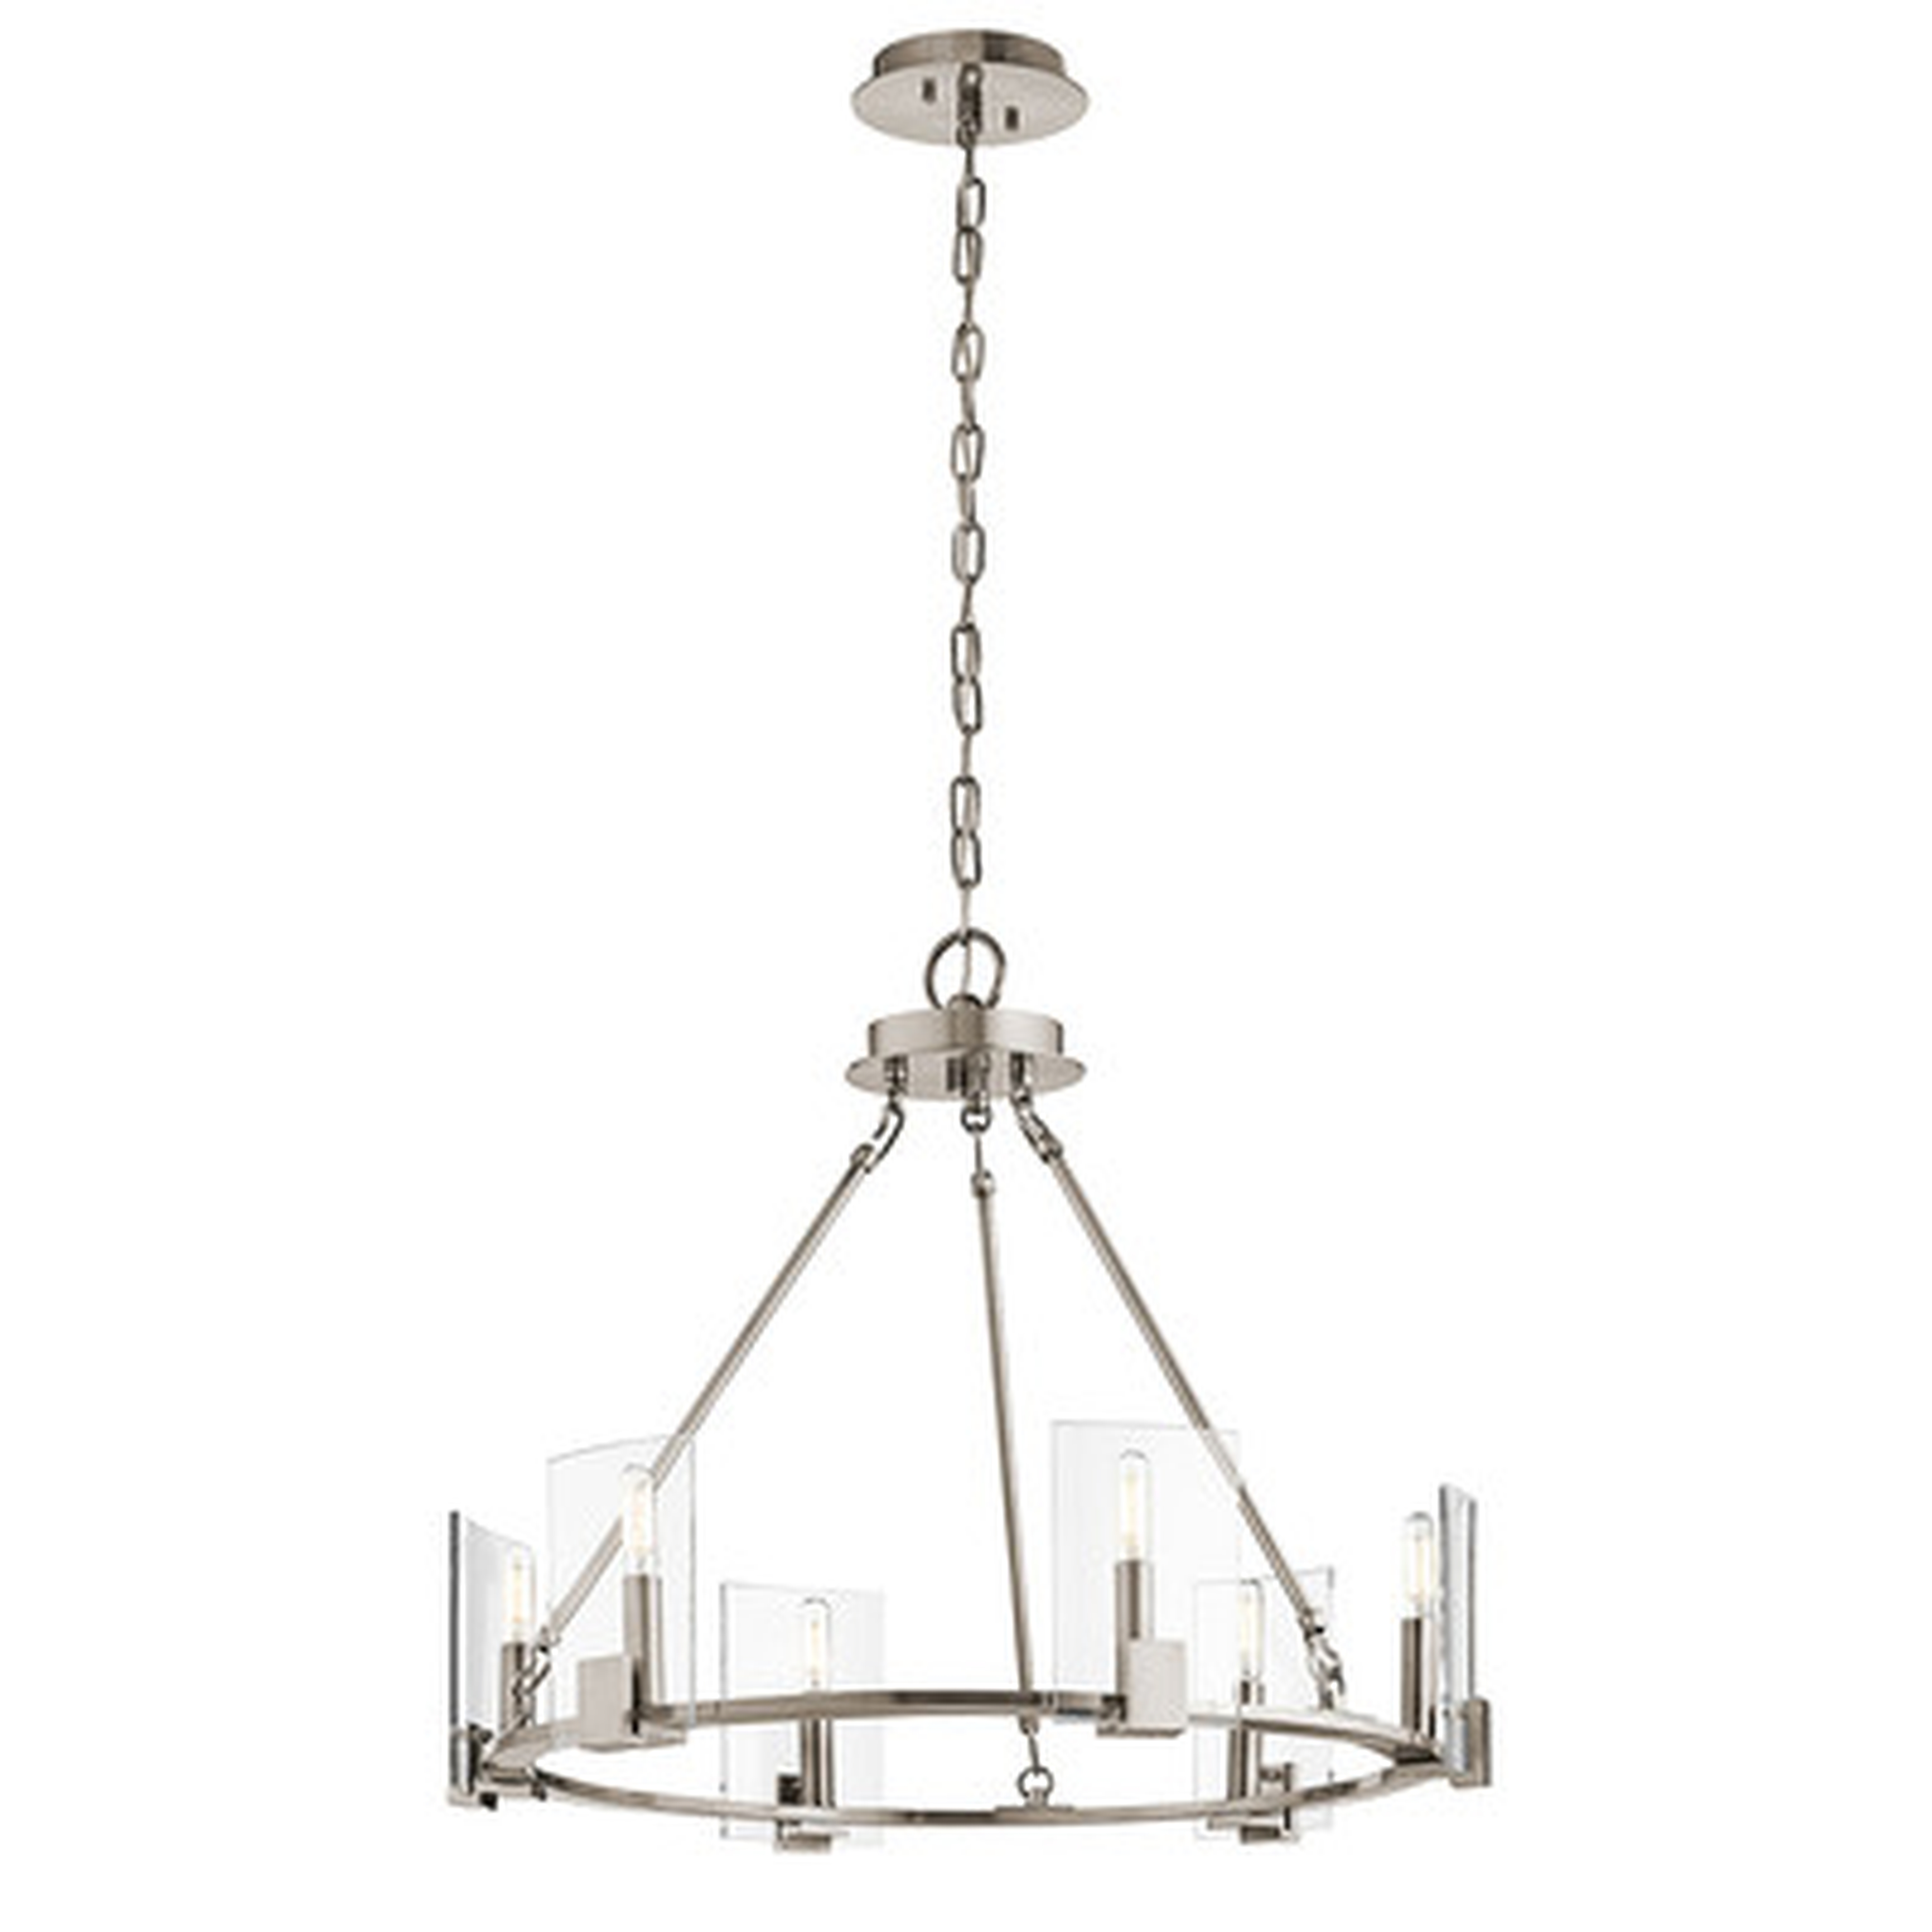 Ahlers 6-Light Candle-Style Chandelier - Wayfair